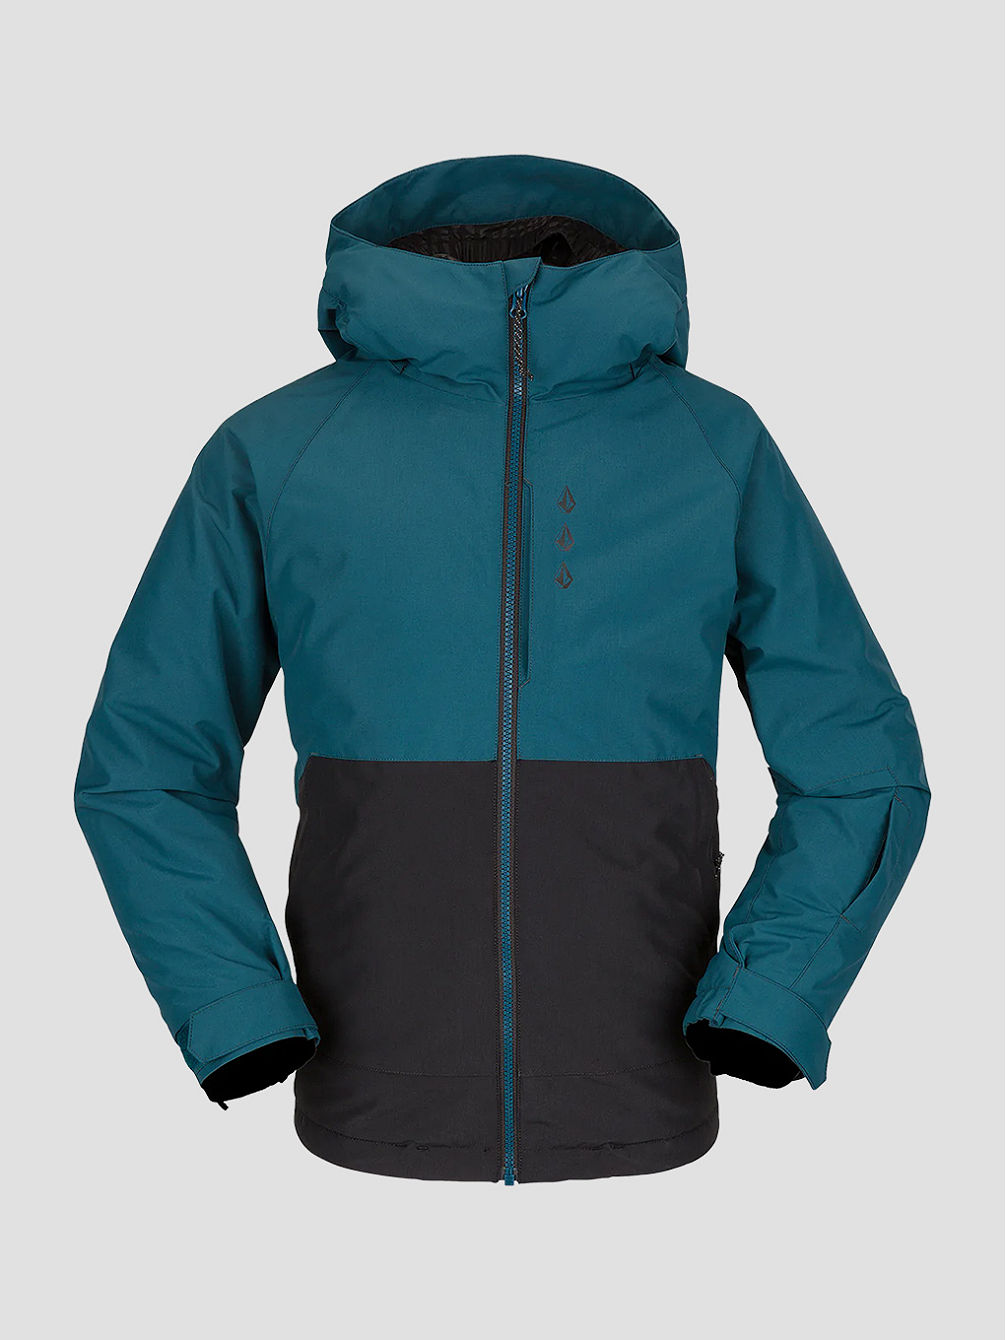 Breck Insulated Jas